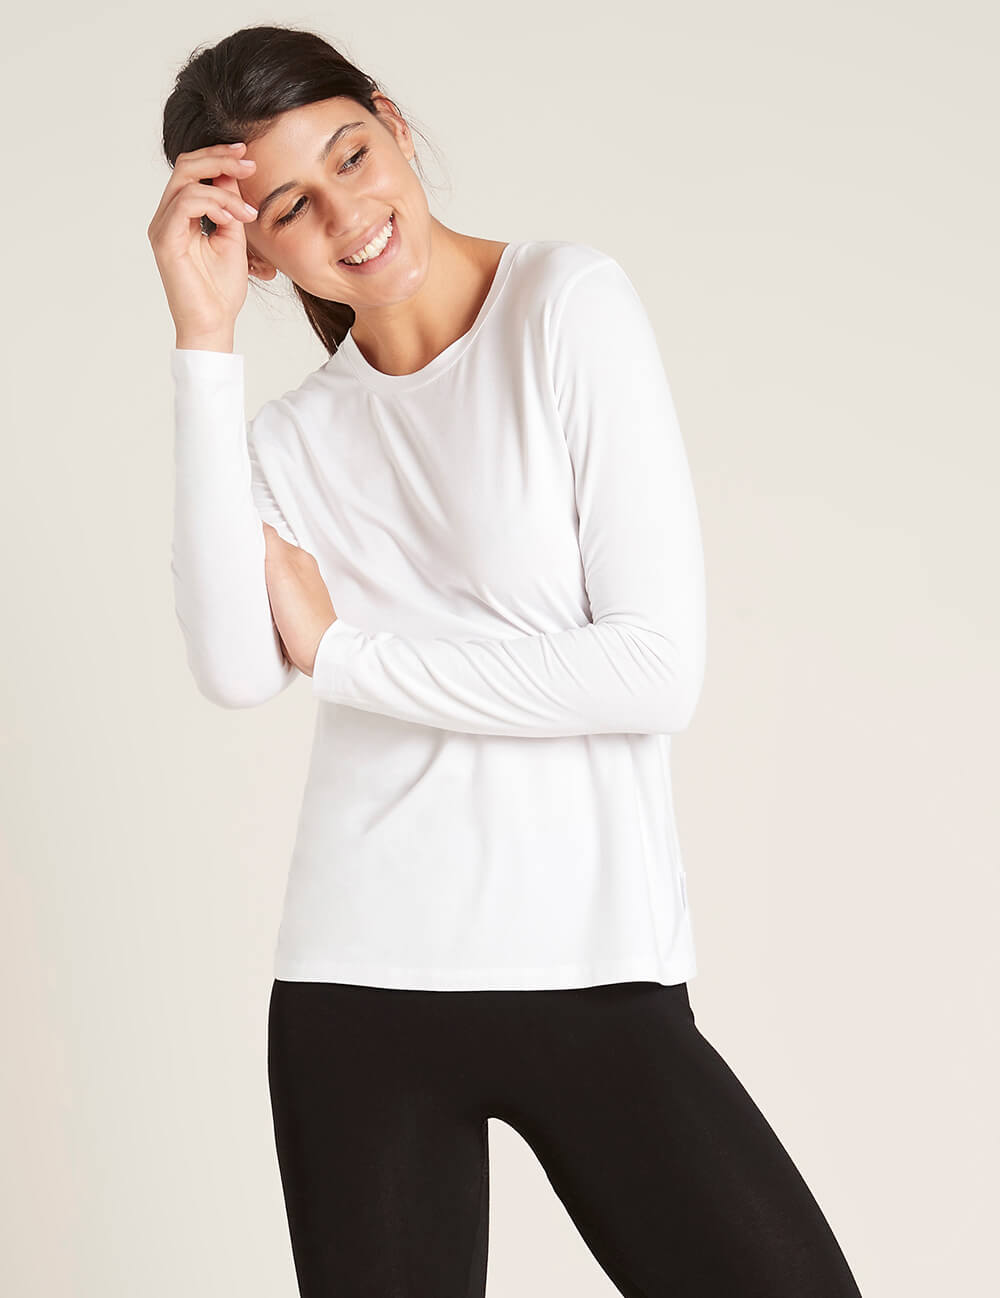 Boody Women's Long Sleeve Round Neck T-Shirt White Front 2